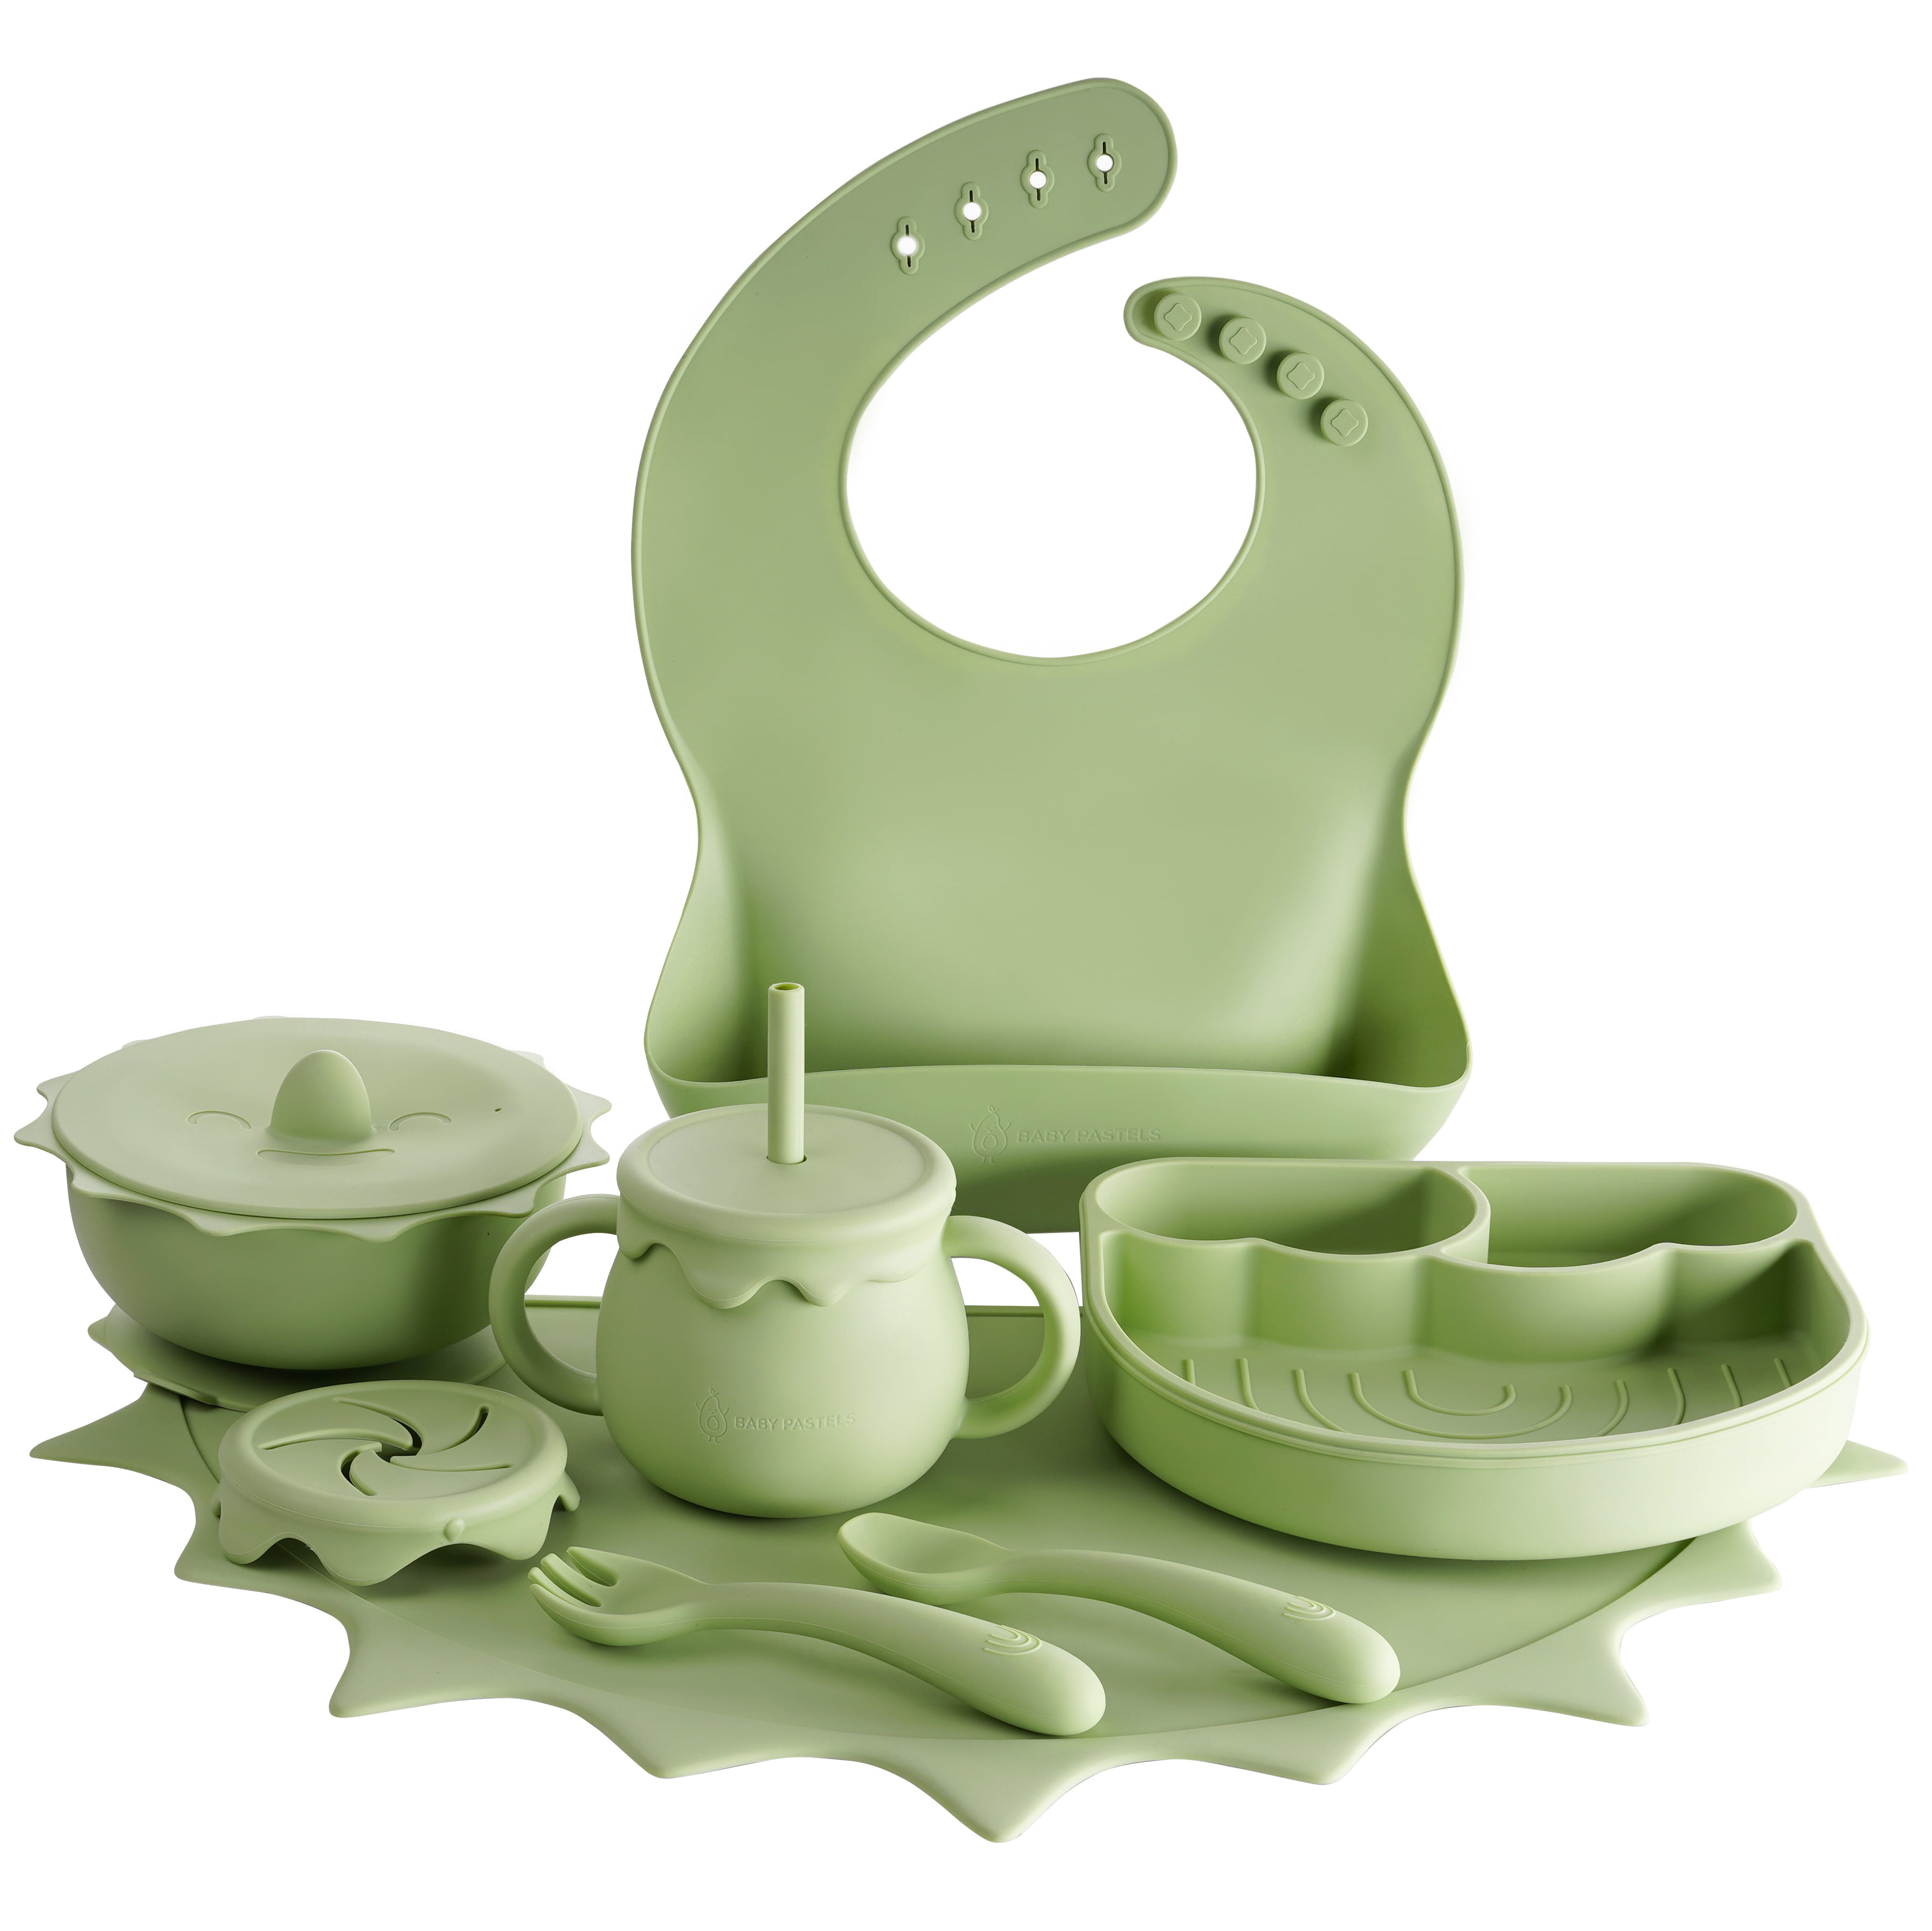  NAZIRABABY Baby Feeding Essentials: 8 Piece Silicone Baby  Feeding Set, Baby Bowl with Suction, Baby Led Weaning Utensils for 6-12  Months - Durable Baby Dishes and Eating Essentials (Flamingo Rose) : Baby